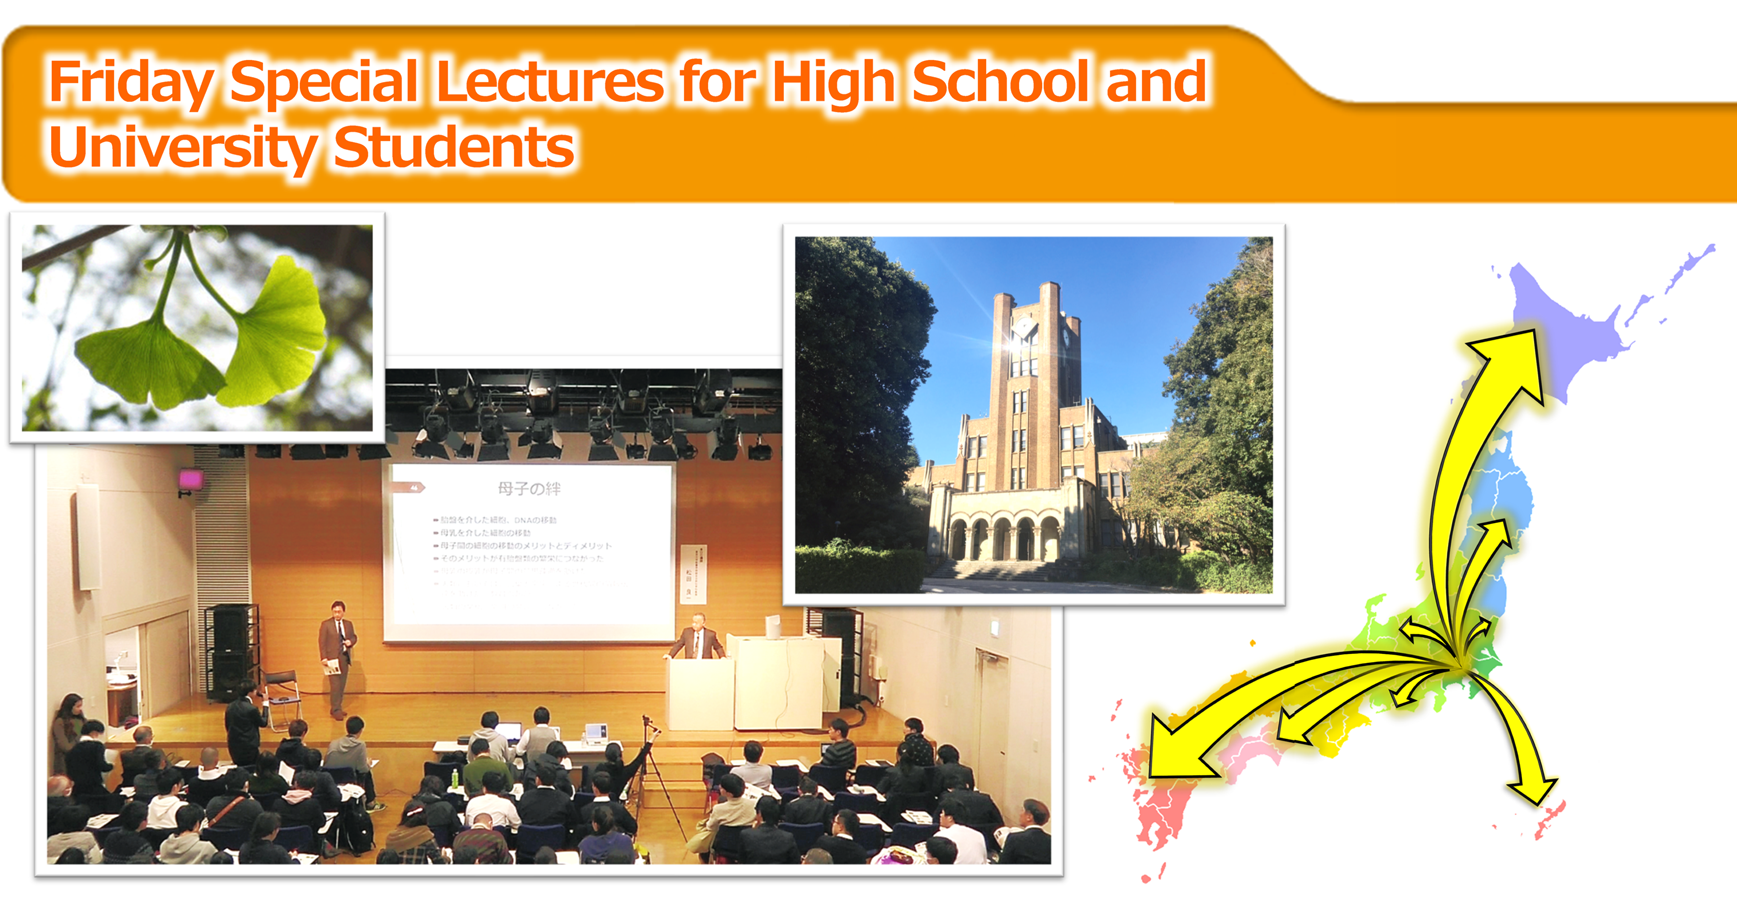 "Friday Special Lectures for High School and University Students" hosted by the College of Arts and Sciences of the University of Tokyo are also available online.